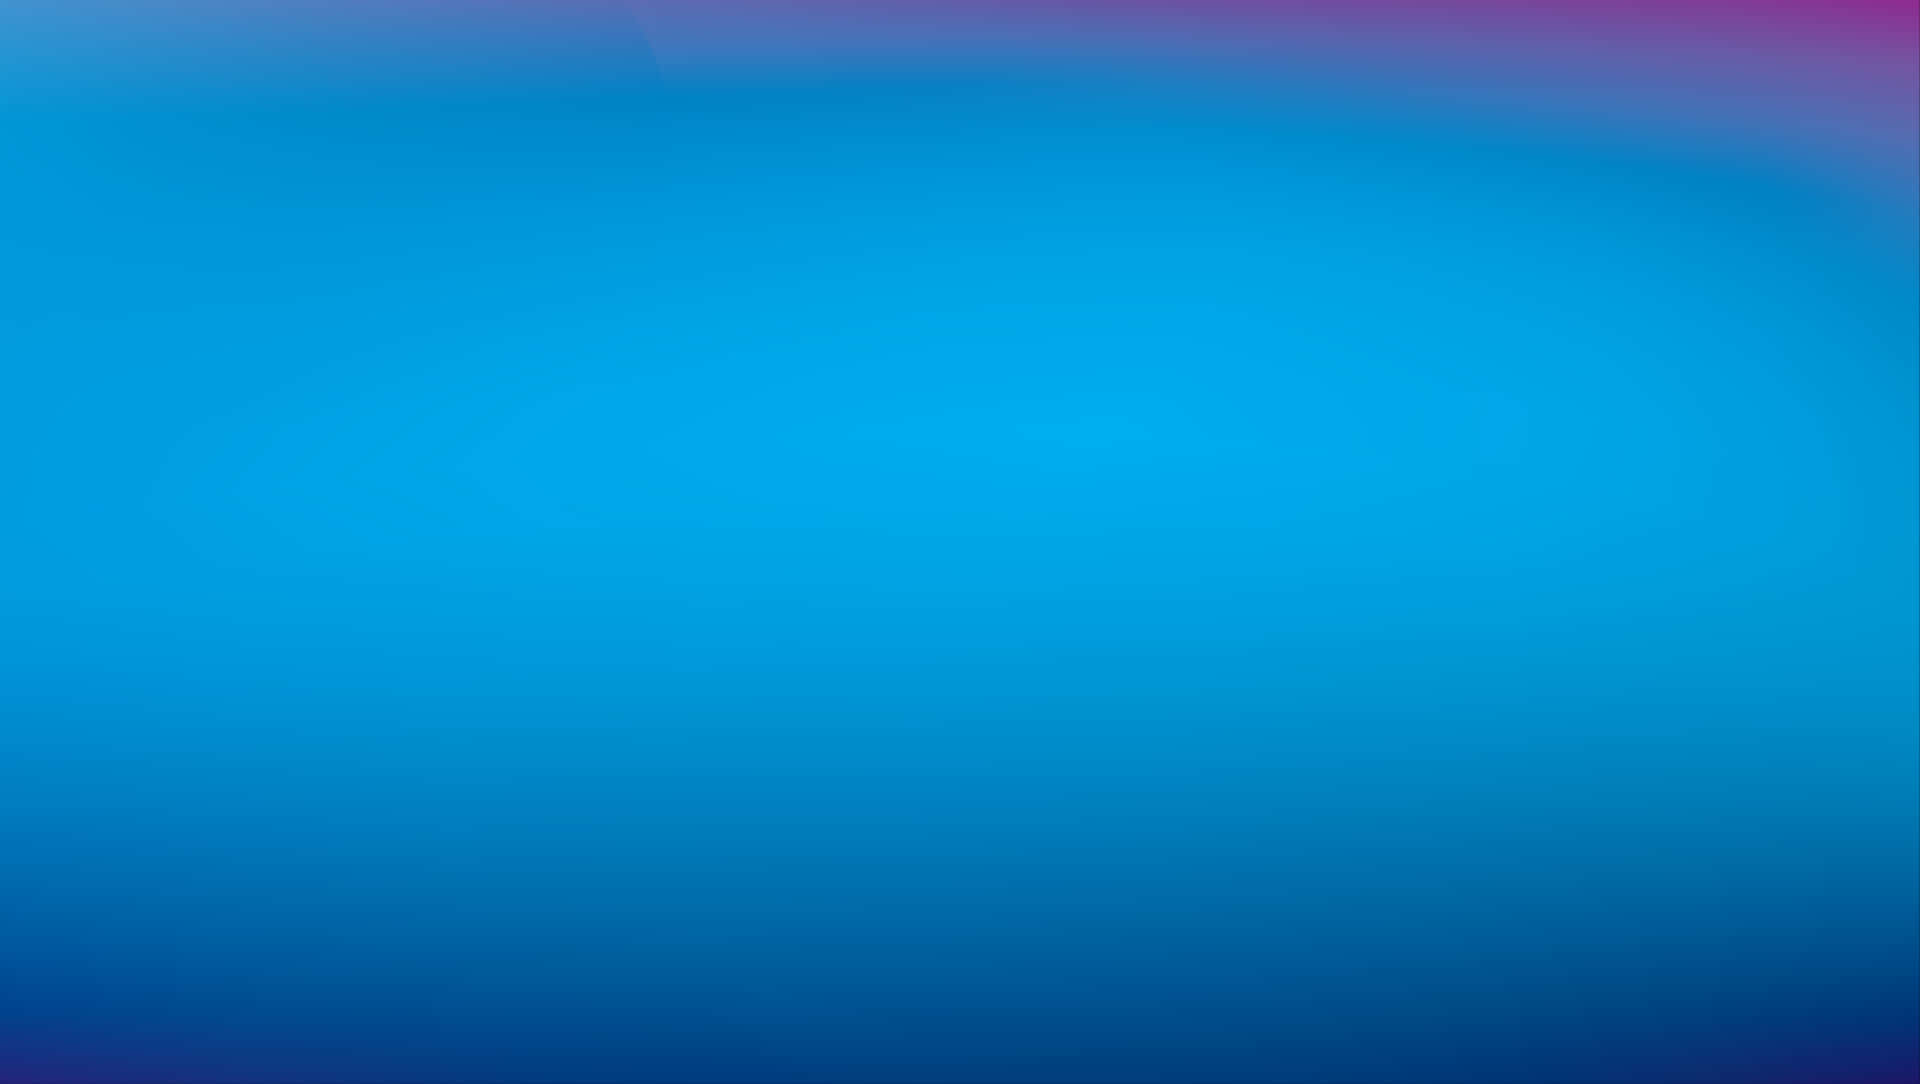 Download Gradient Blue Aesthetic Banner Background | Wallpapers.com